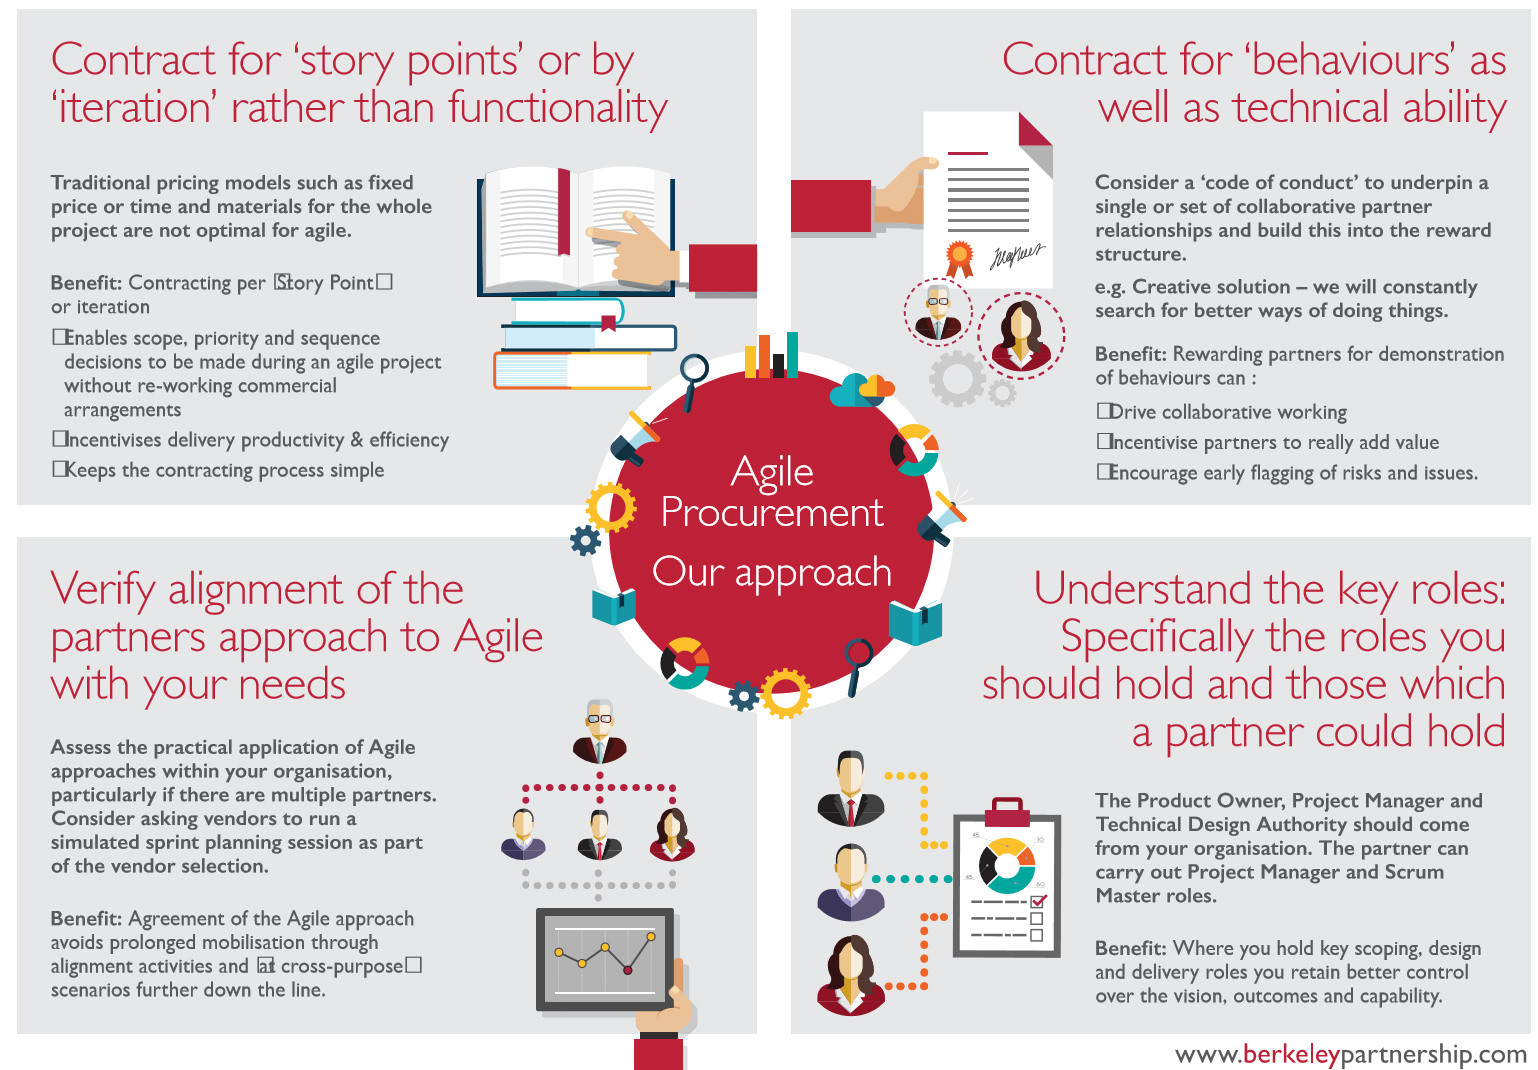 The Berkeley Partnership graphic outlining four key insights for delivering a successful agile procurement approach